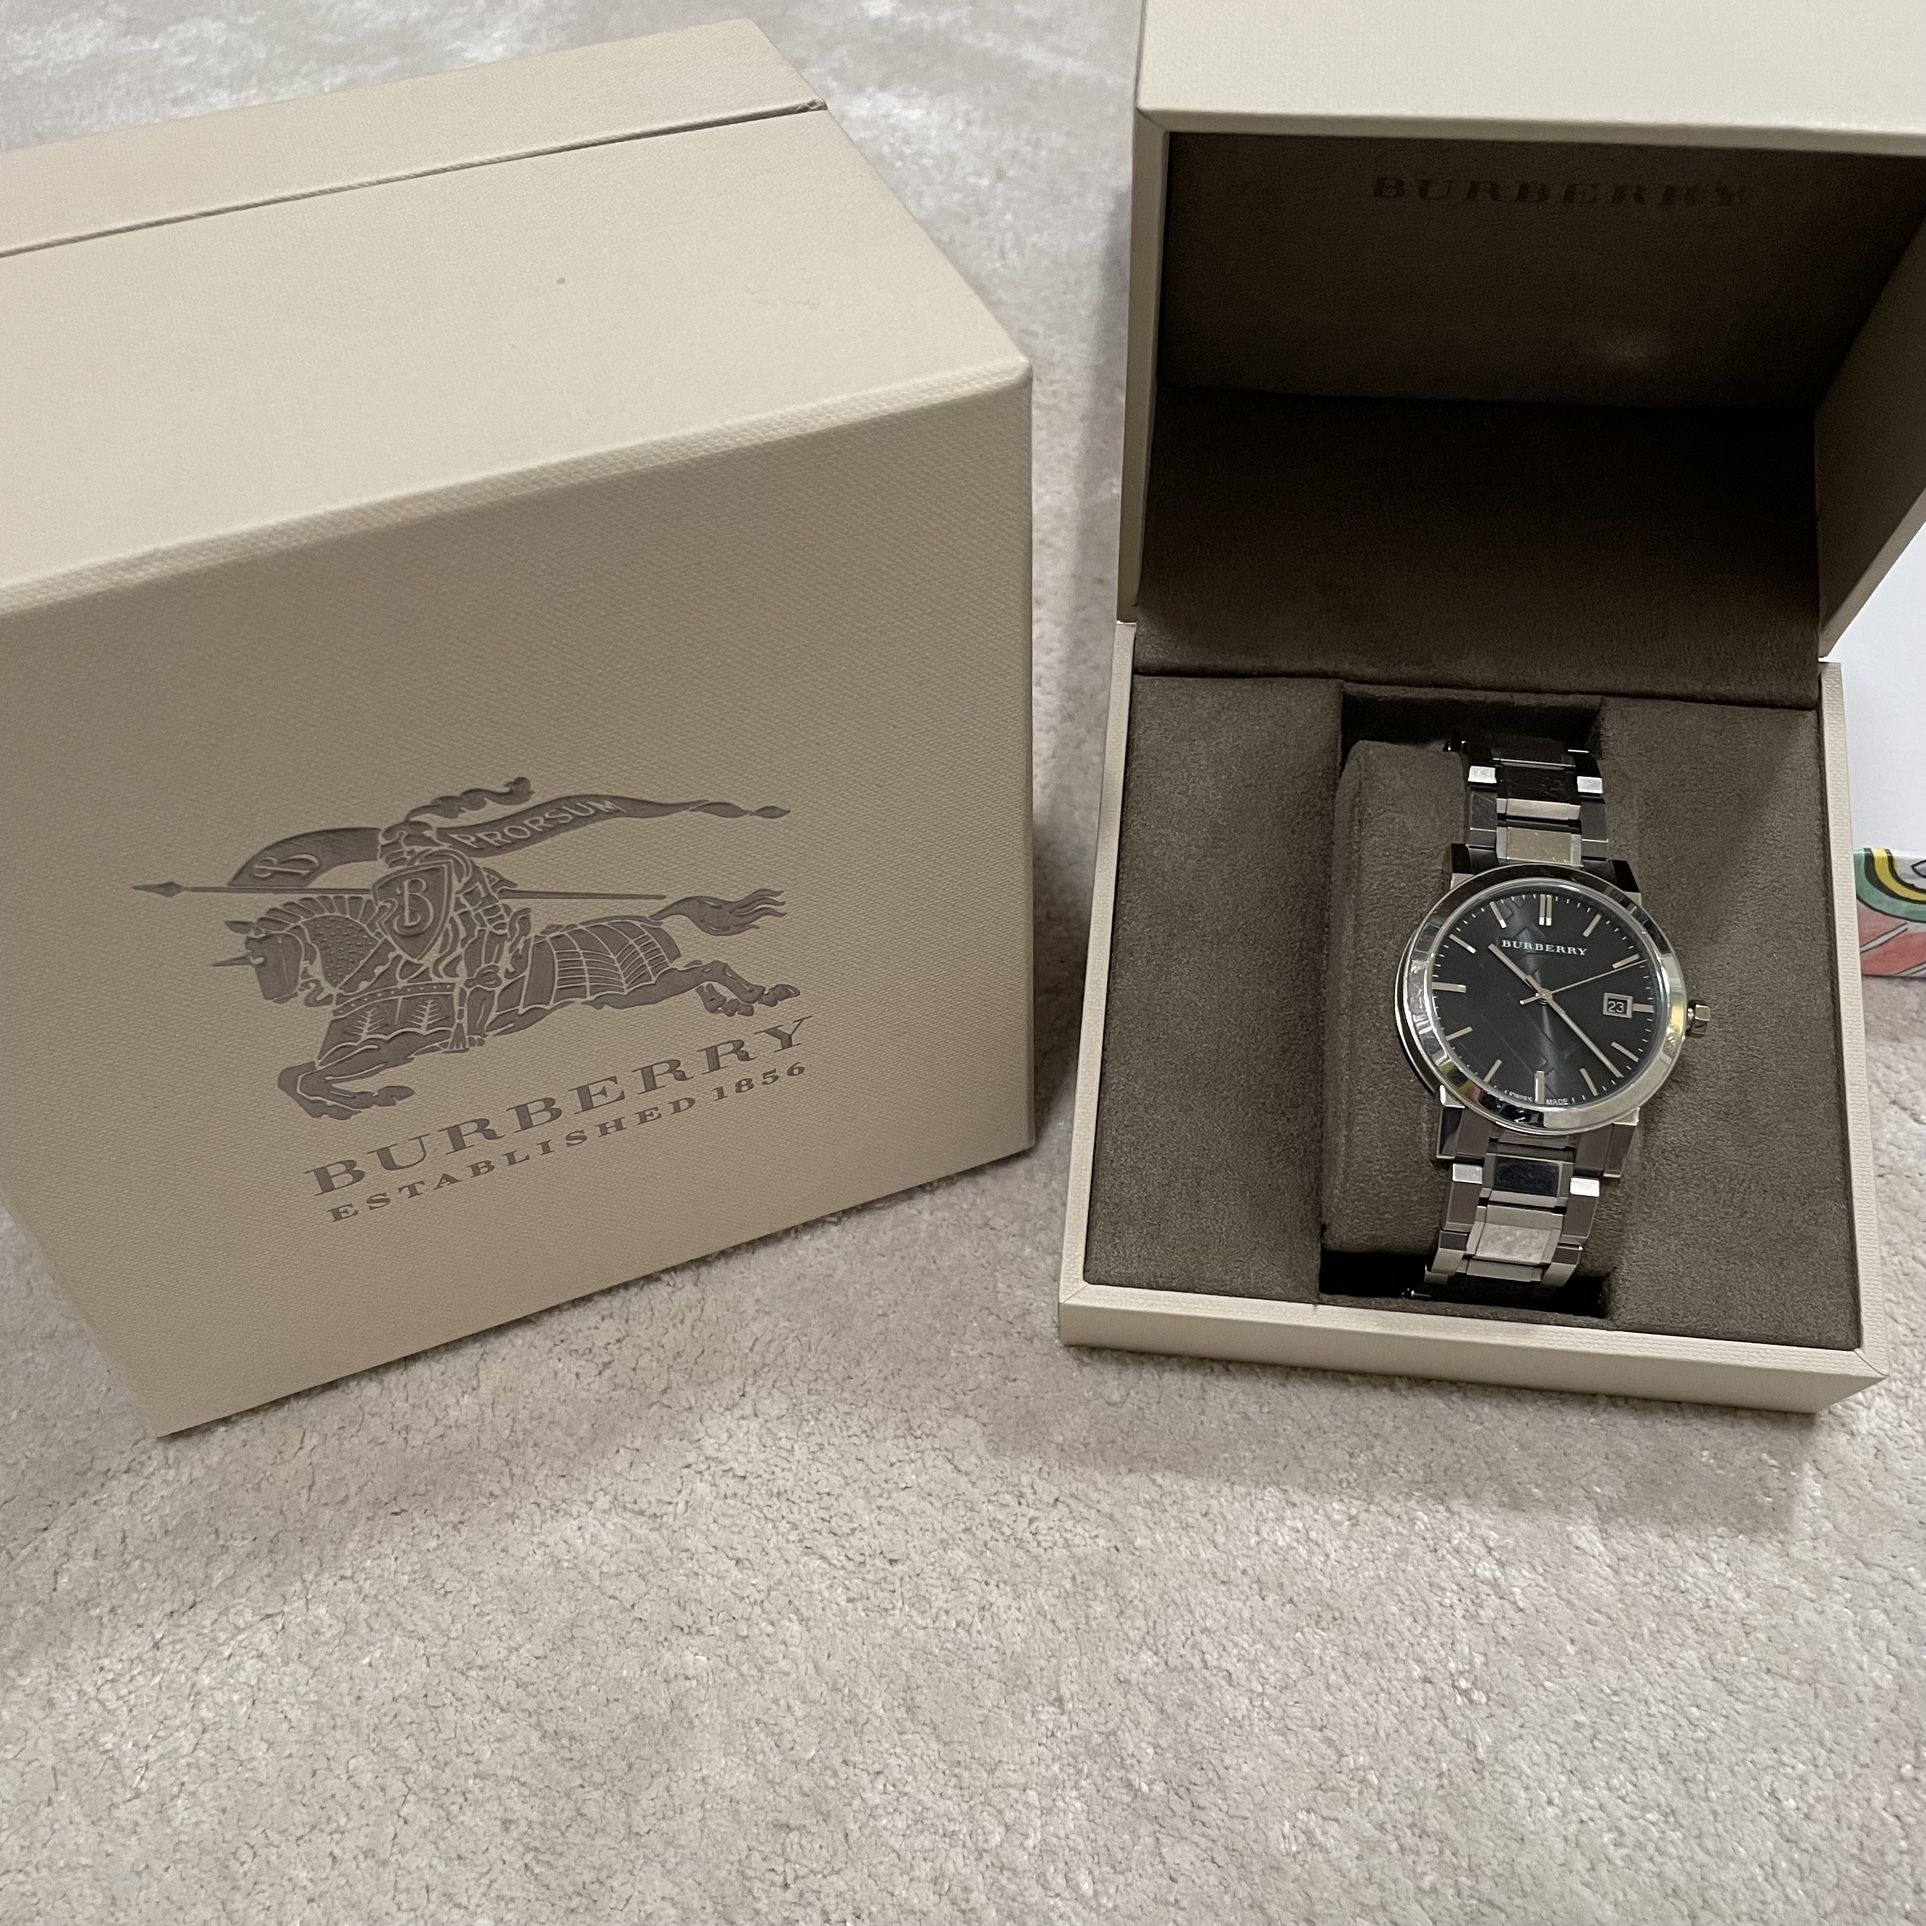 Unisex Burberry 38mm Stainless Steel Watch With Box 